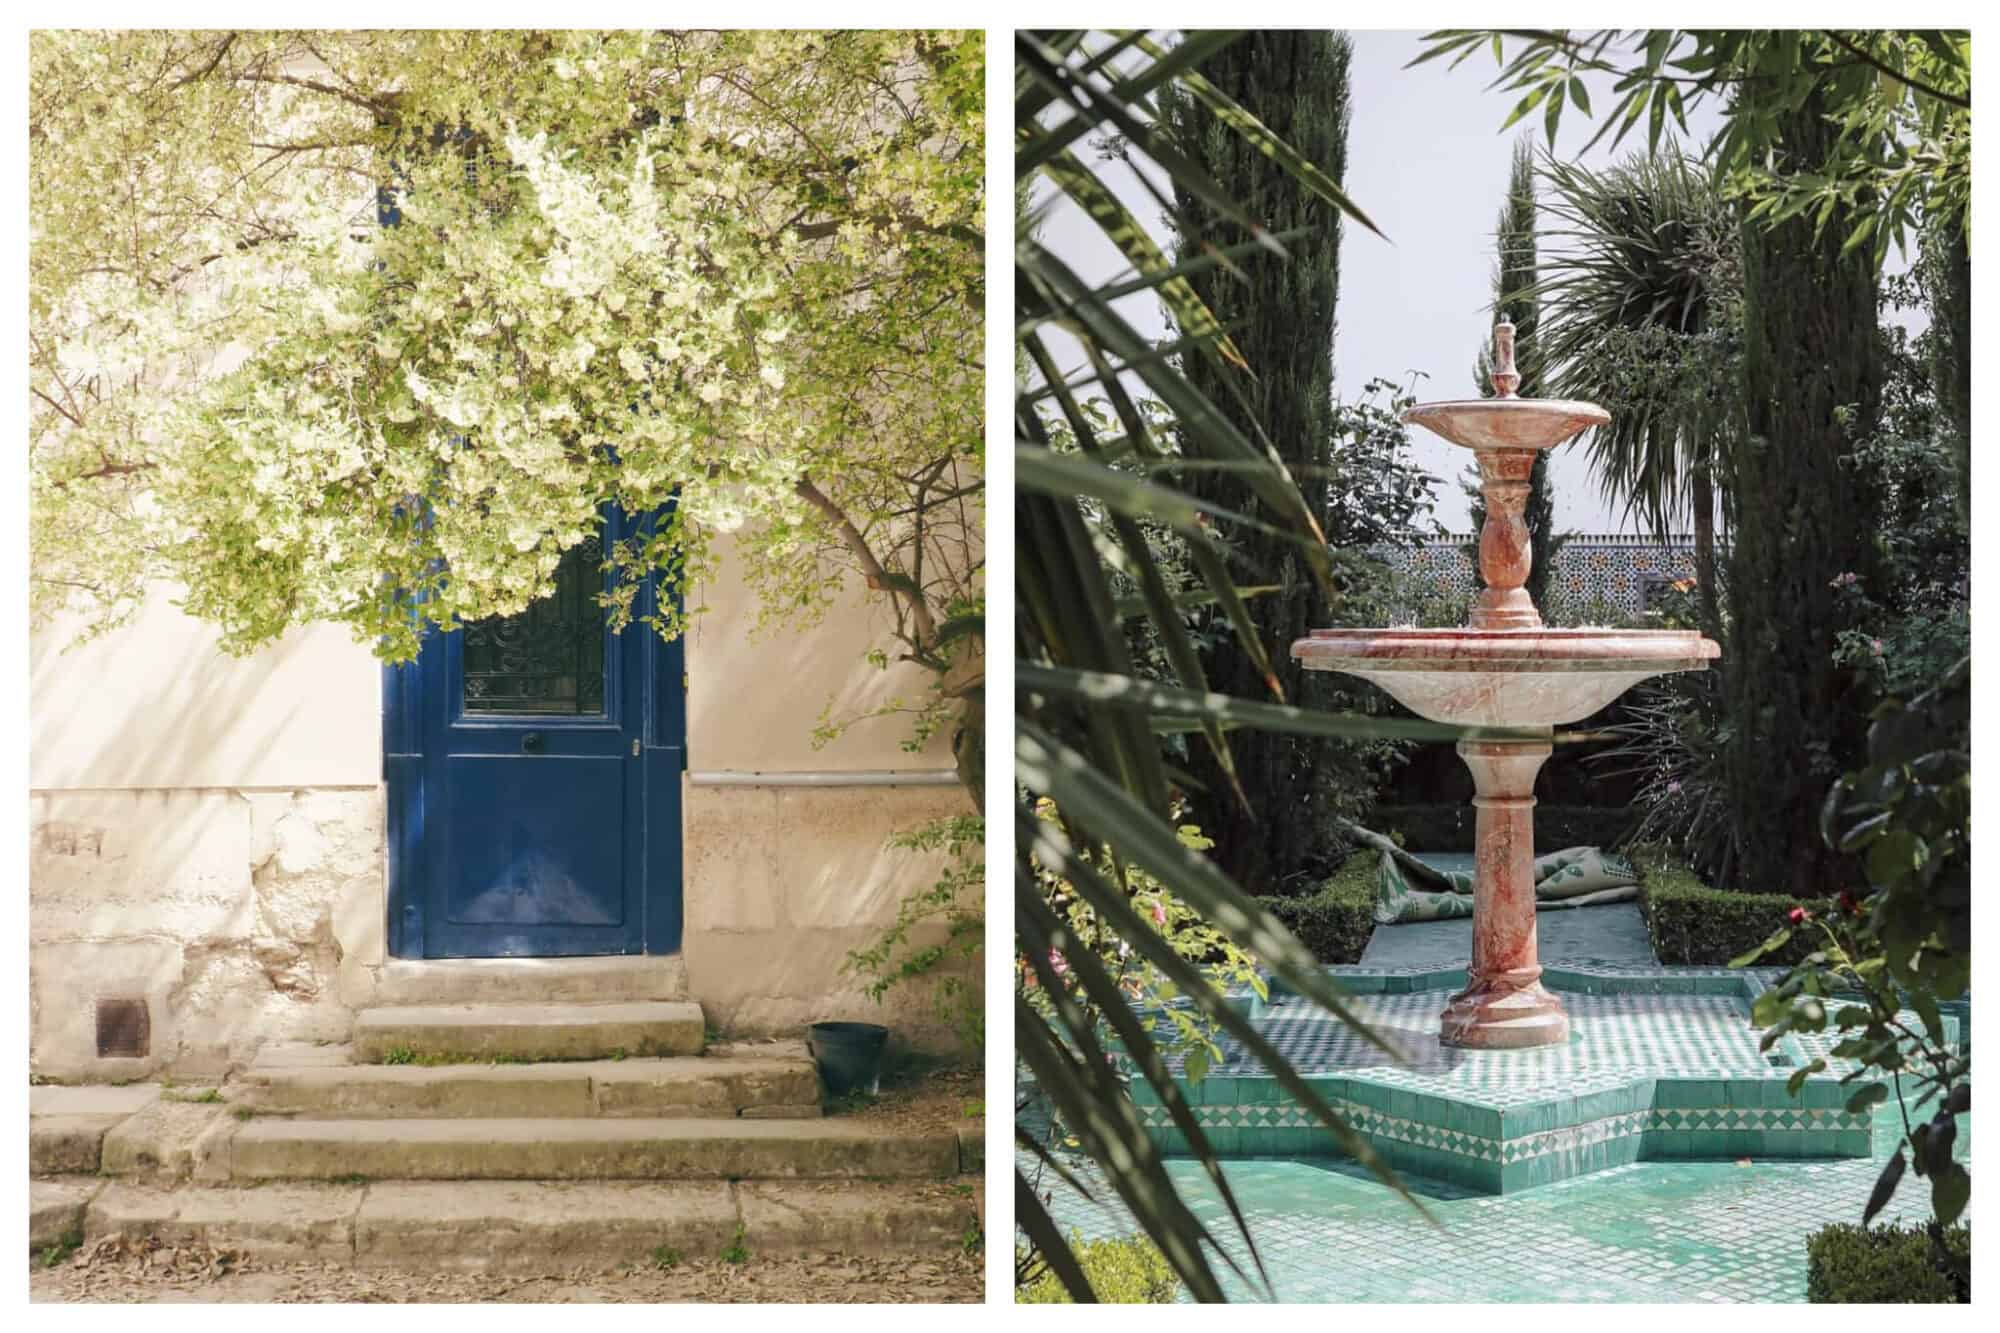 Left: A beautiful tree shades a blue door at the Jardin de Plantes in Paris' left bank on a sunny day, Right: A fountain sits atop blue and white tiles and between plants at thebeautiful Grande Mosquée de Paris